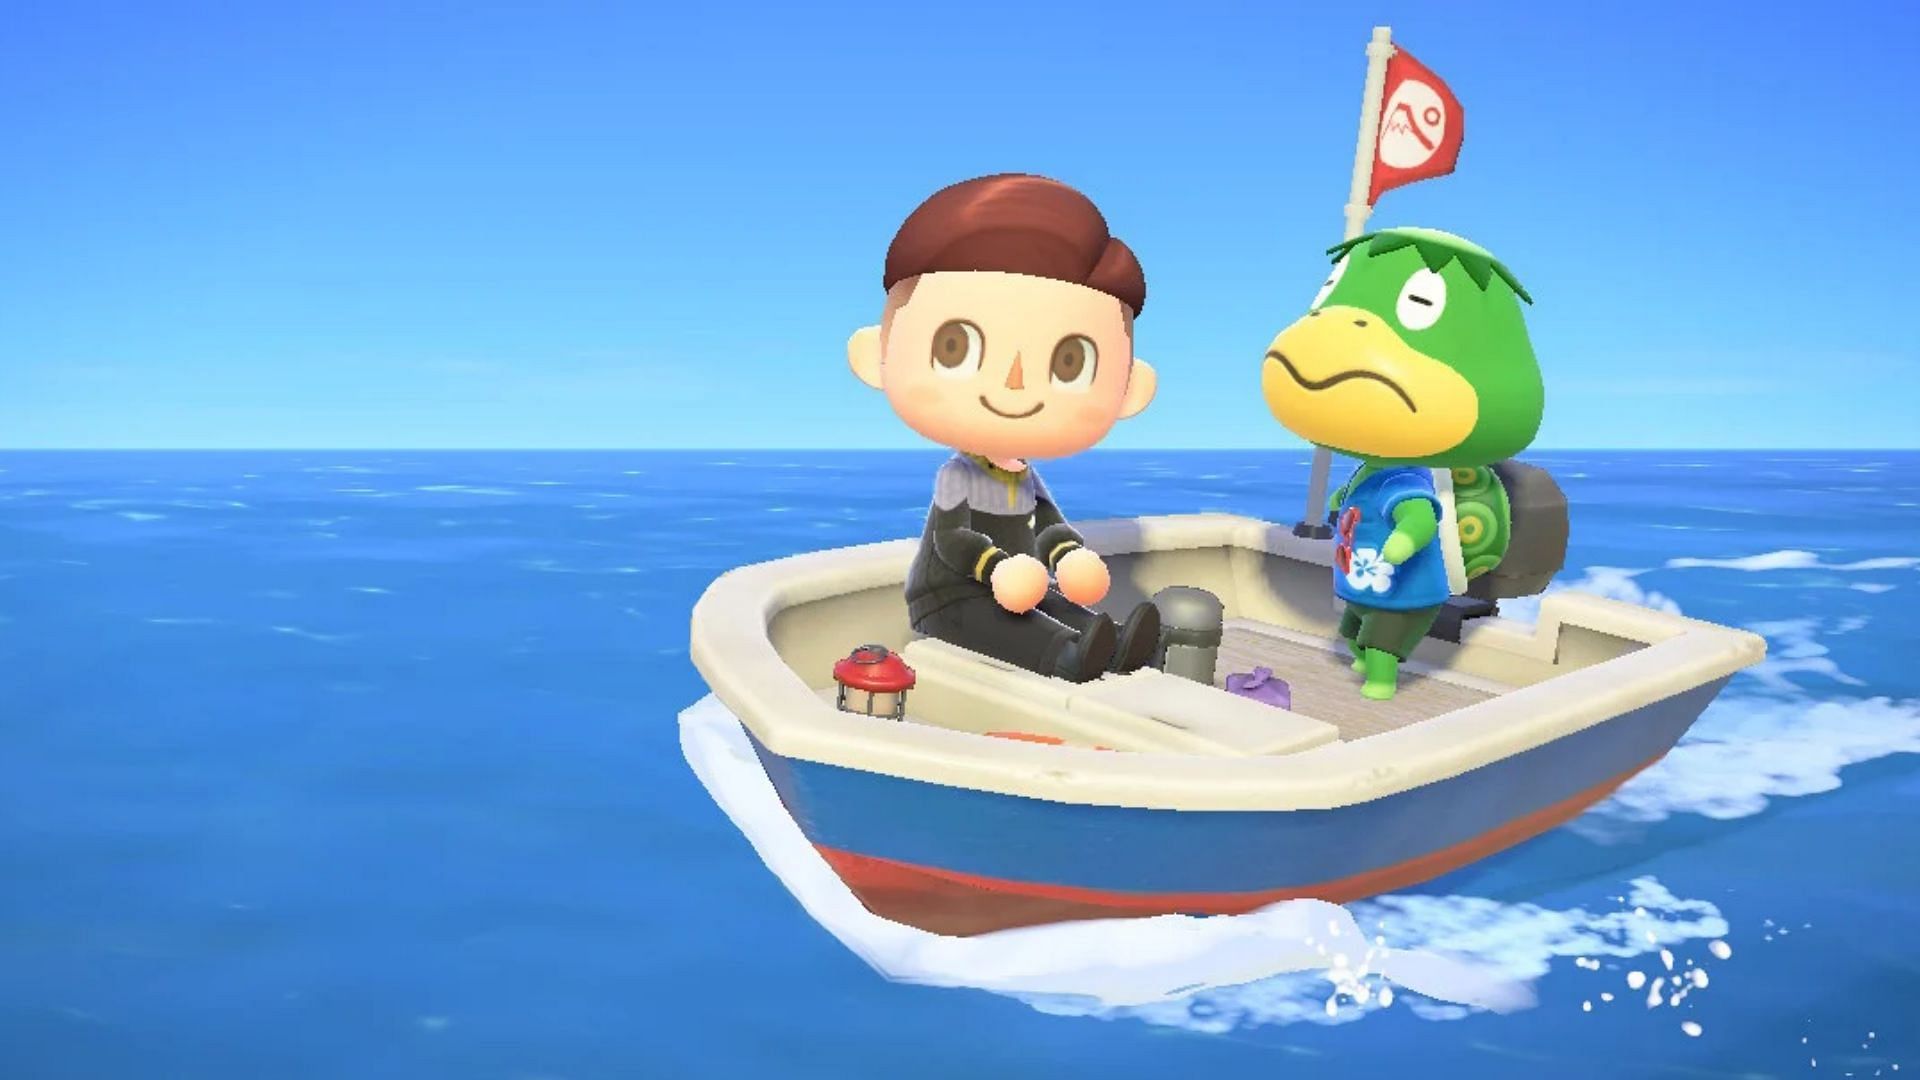 Animal Crossing: New Horizons YouTuber discovers secret mystery island hack in the game (Image via Nintendo Life)